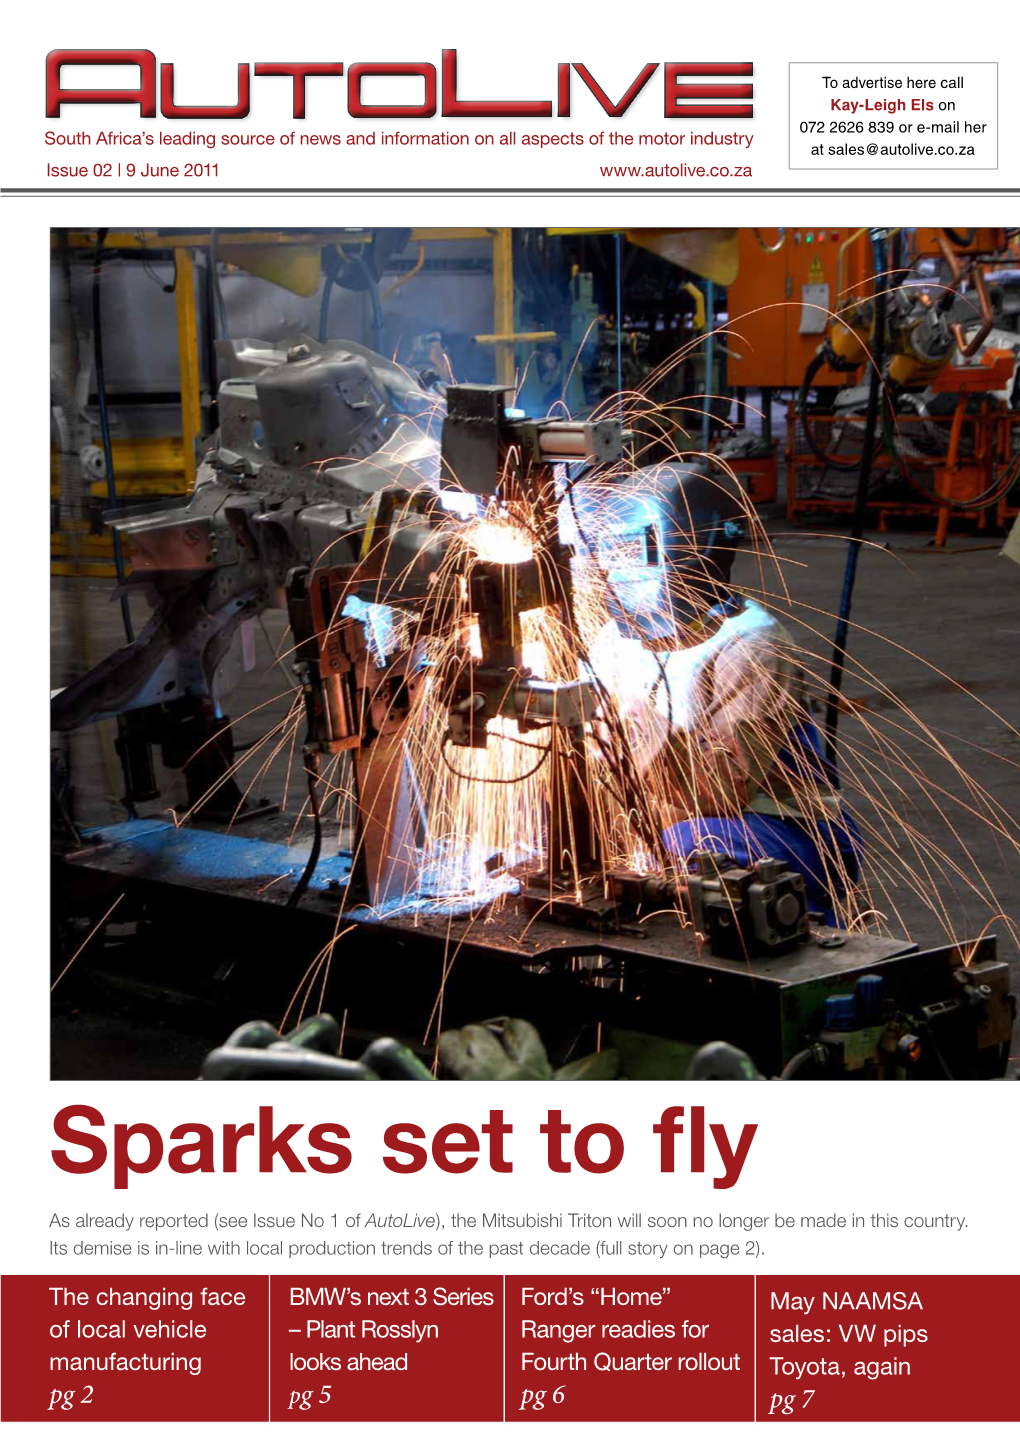 Sparks Set to Fly